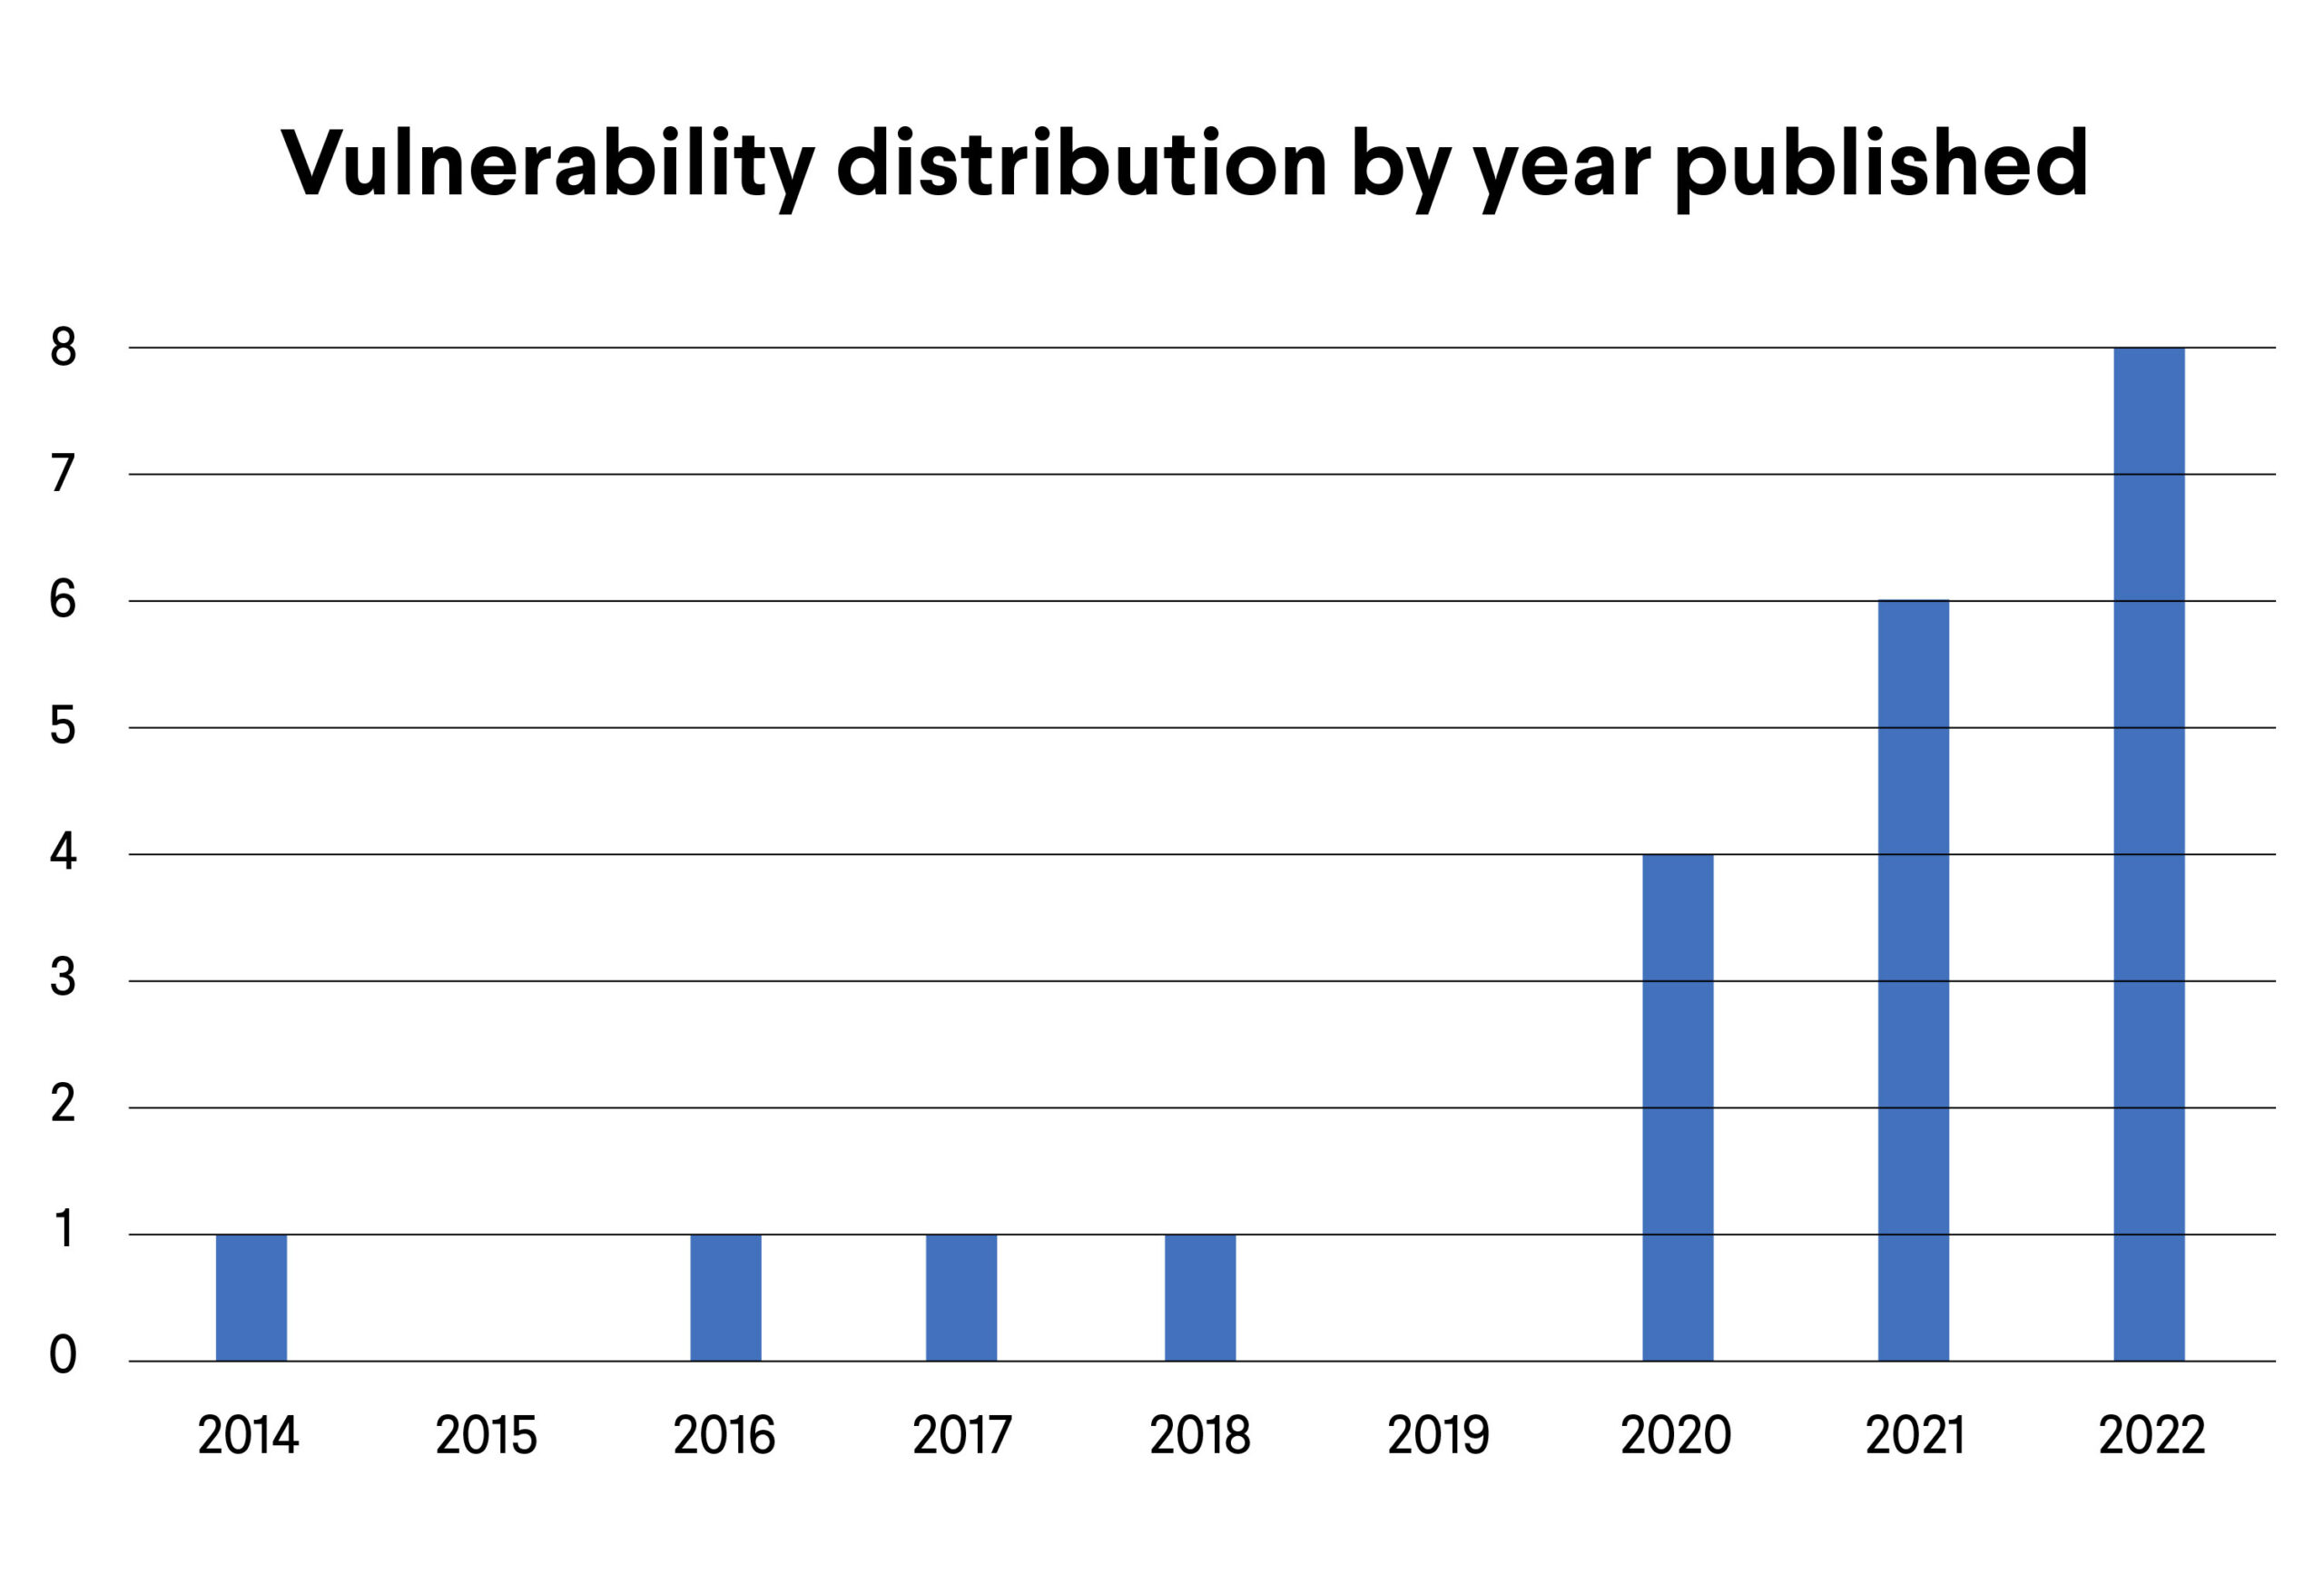 Zerobot vulnerability exploits used in November. Out of 22 exploits, 8 were published in 2022, 6 in 2021, 4 in 2020. The botnet also used one exploit from 2014, 2016, 2017 and 2018 each.